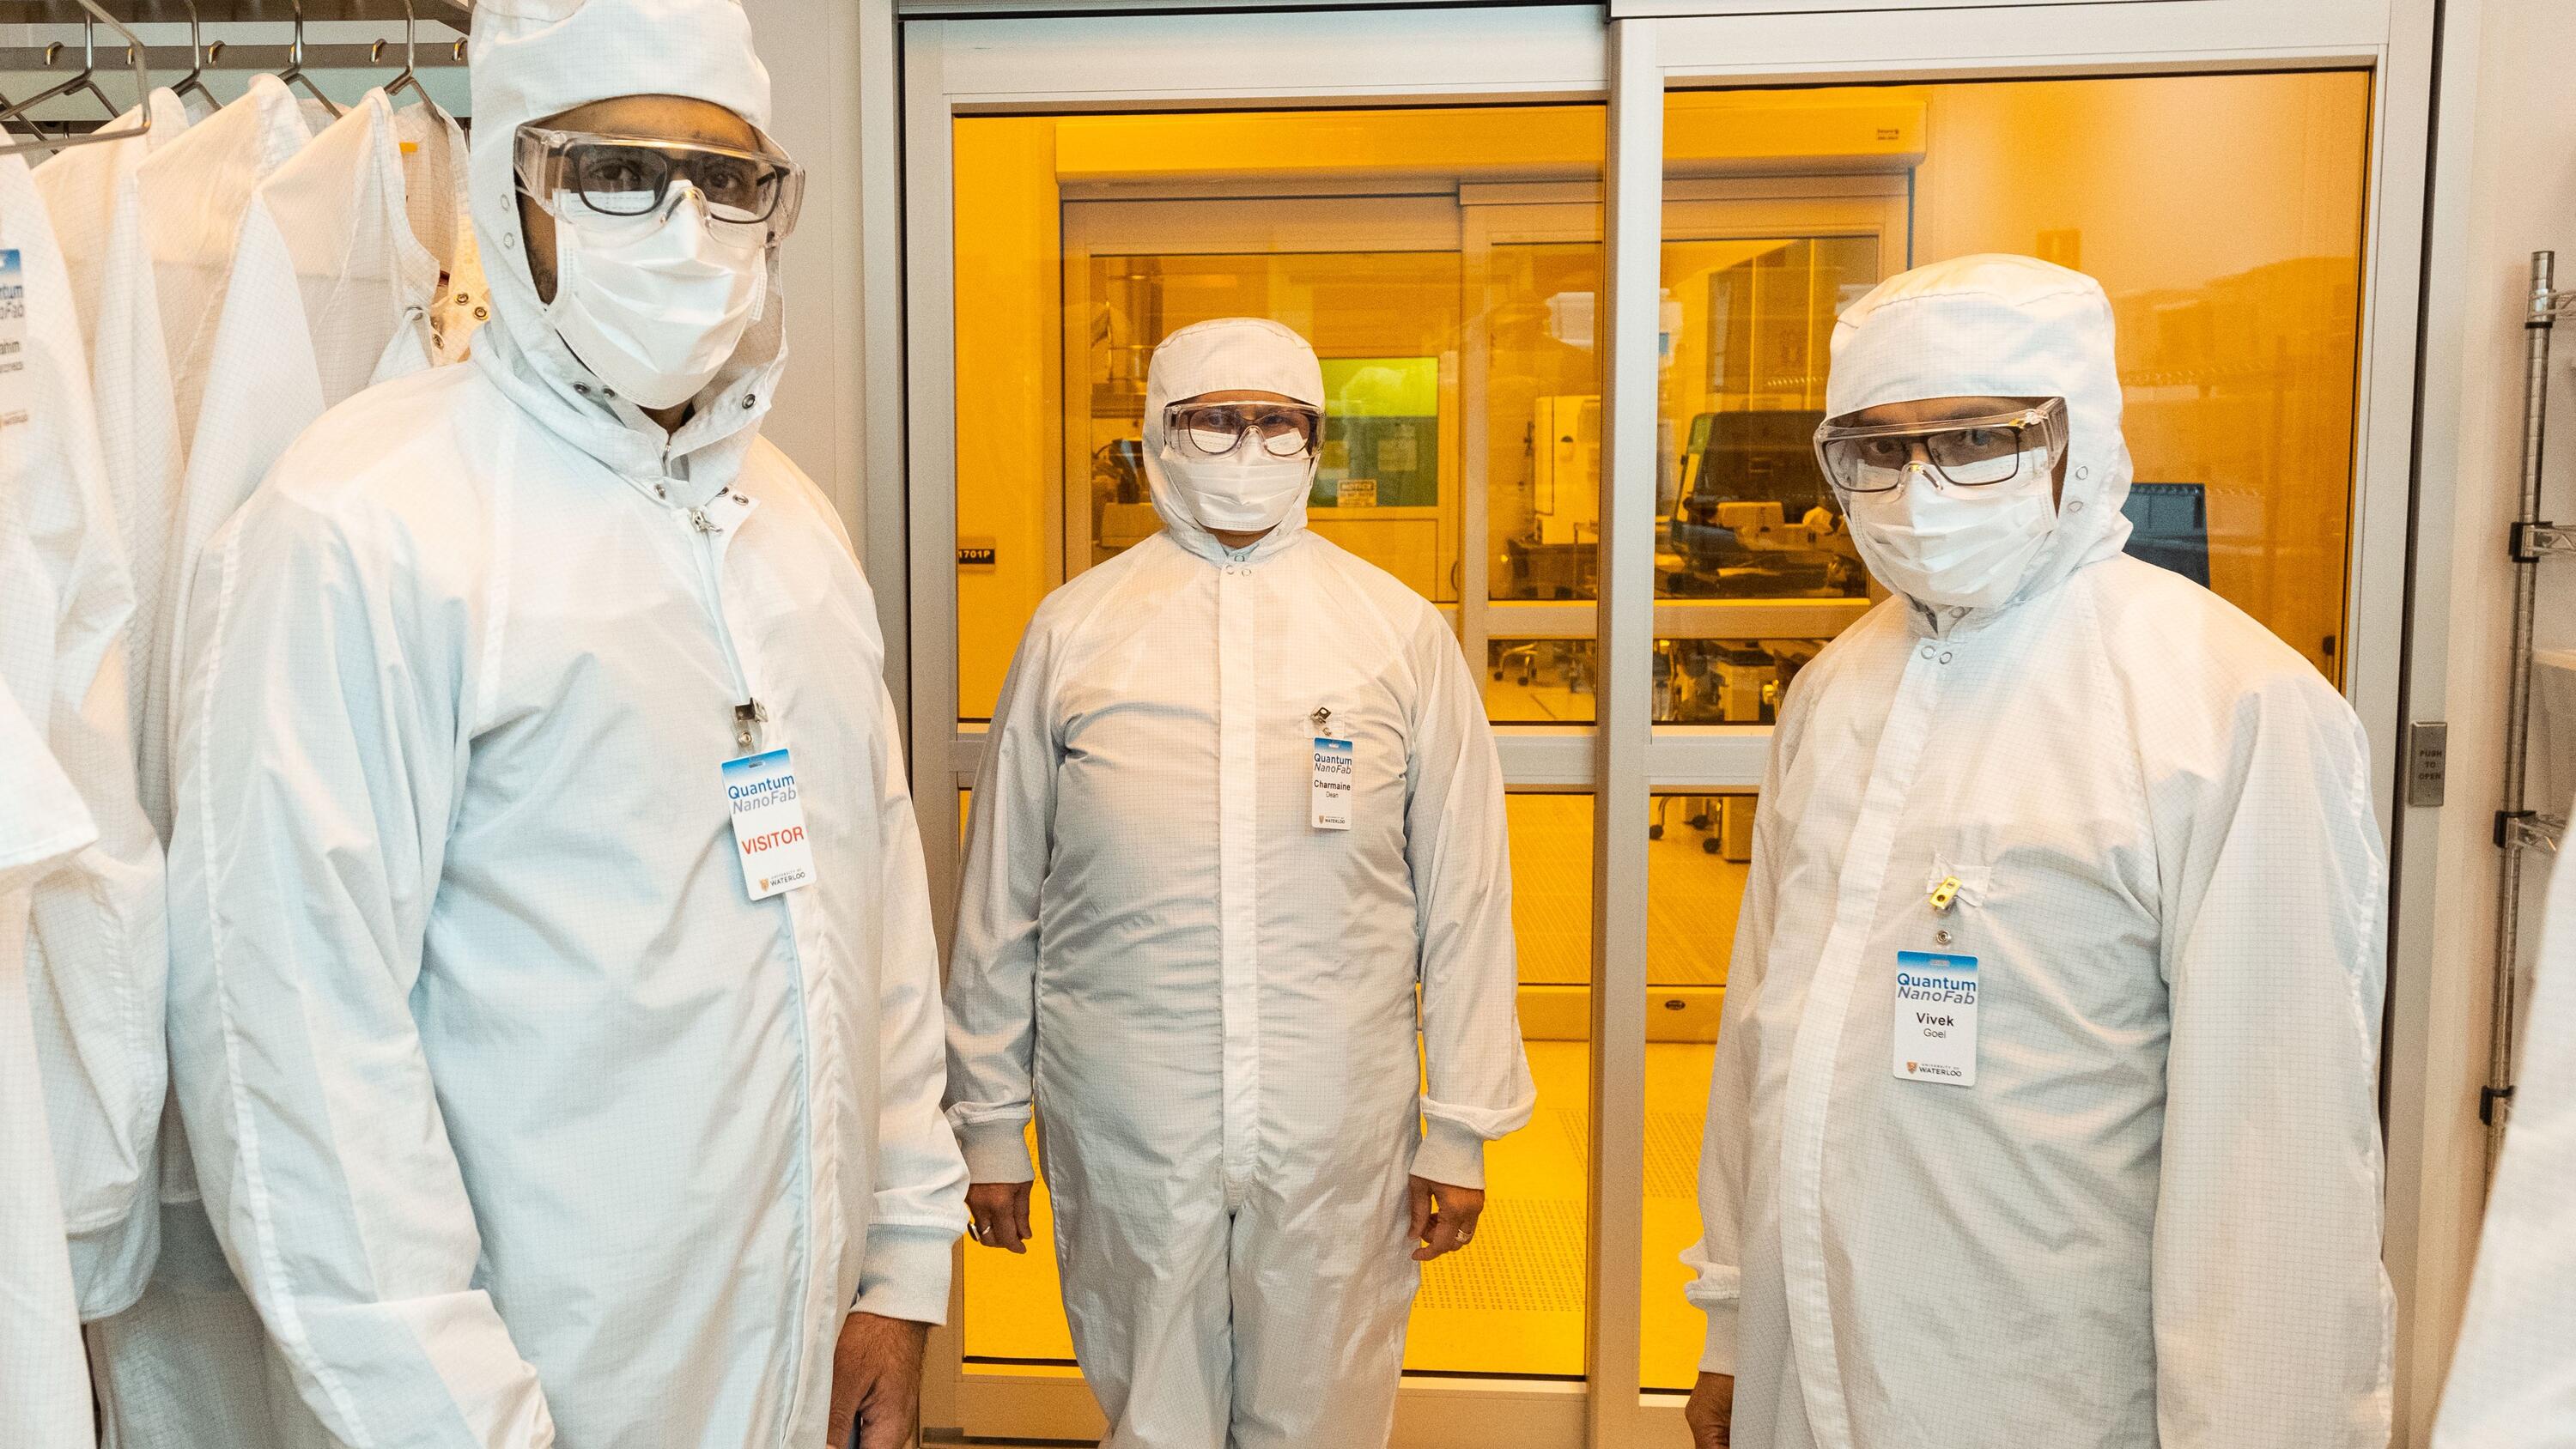 Dignitaries in cleanroom suits